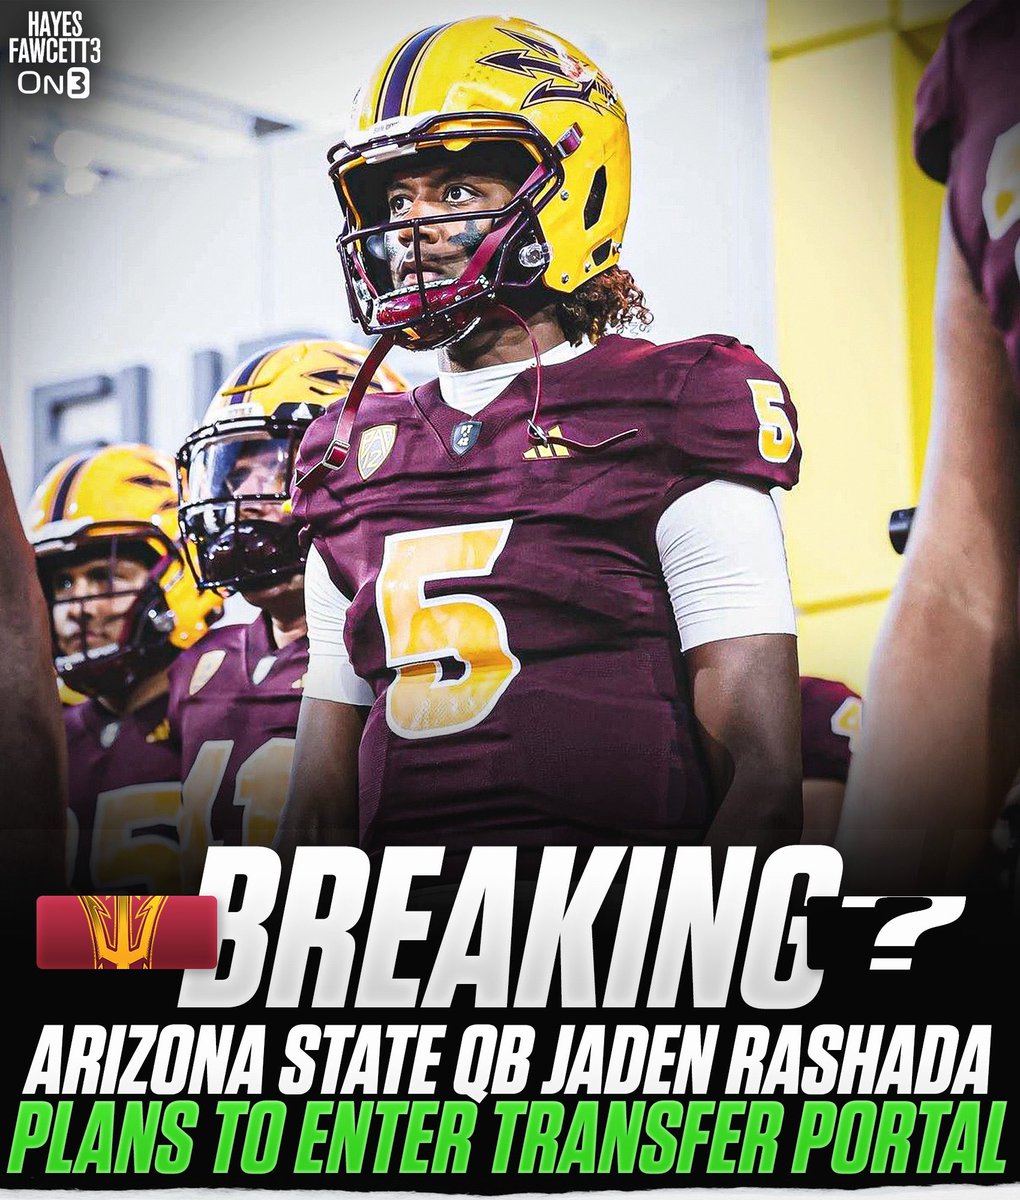 BREAKING: Arizona State QB Jaden Rashada plans to enter the Transfer Portal, he tells @on3sports The 6’4 190 QB was an Elite 11 Finalist and Under Armour All-American coming out of HS Will have 4 years of eligibility remaining on3.com/db/jaden-rasha…